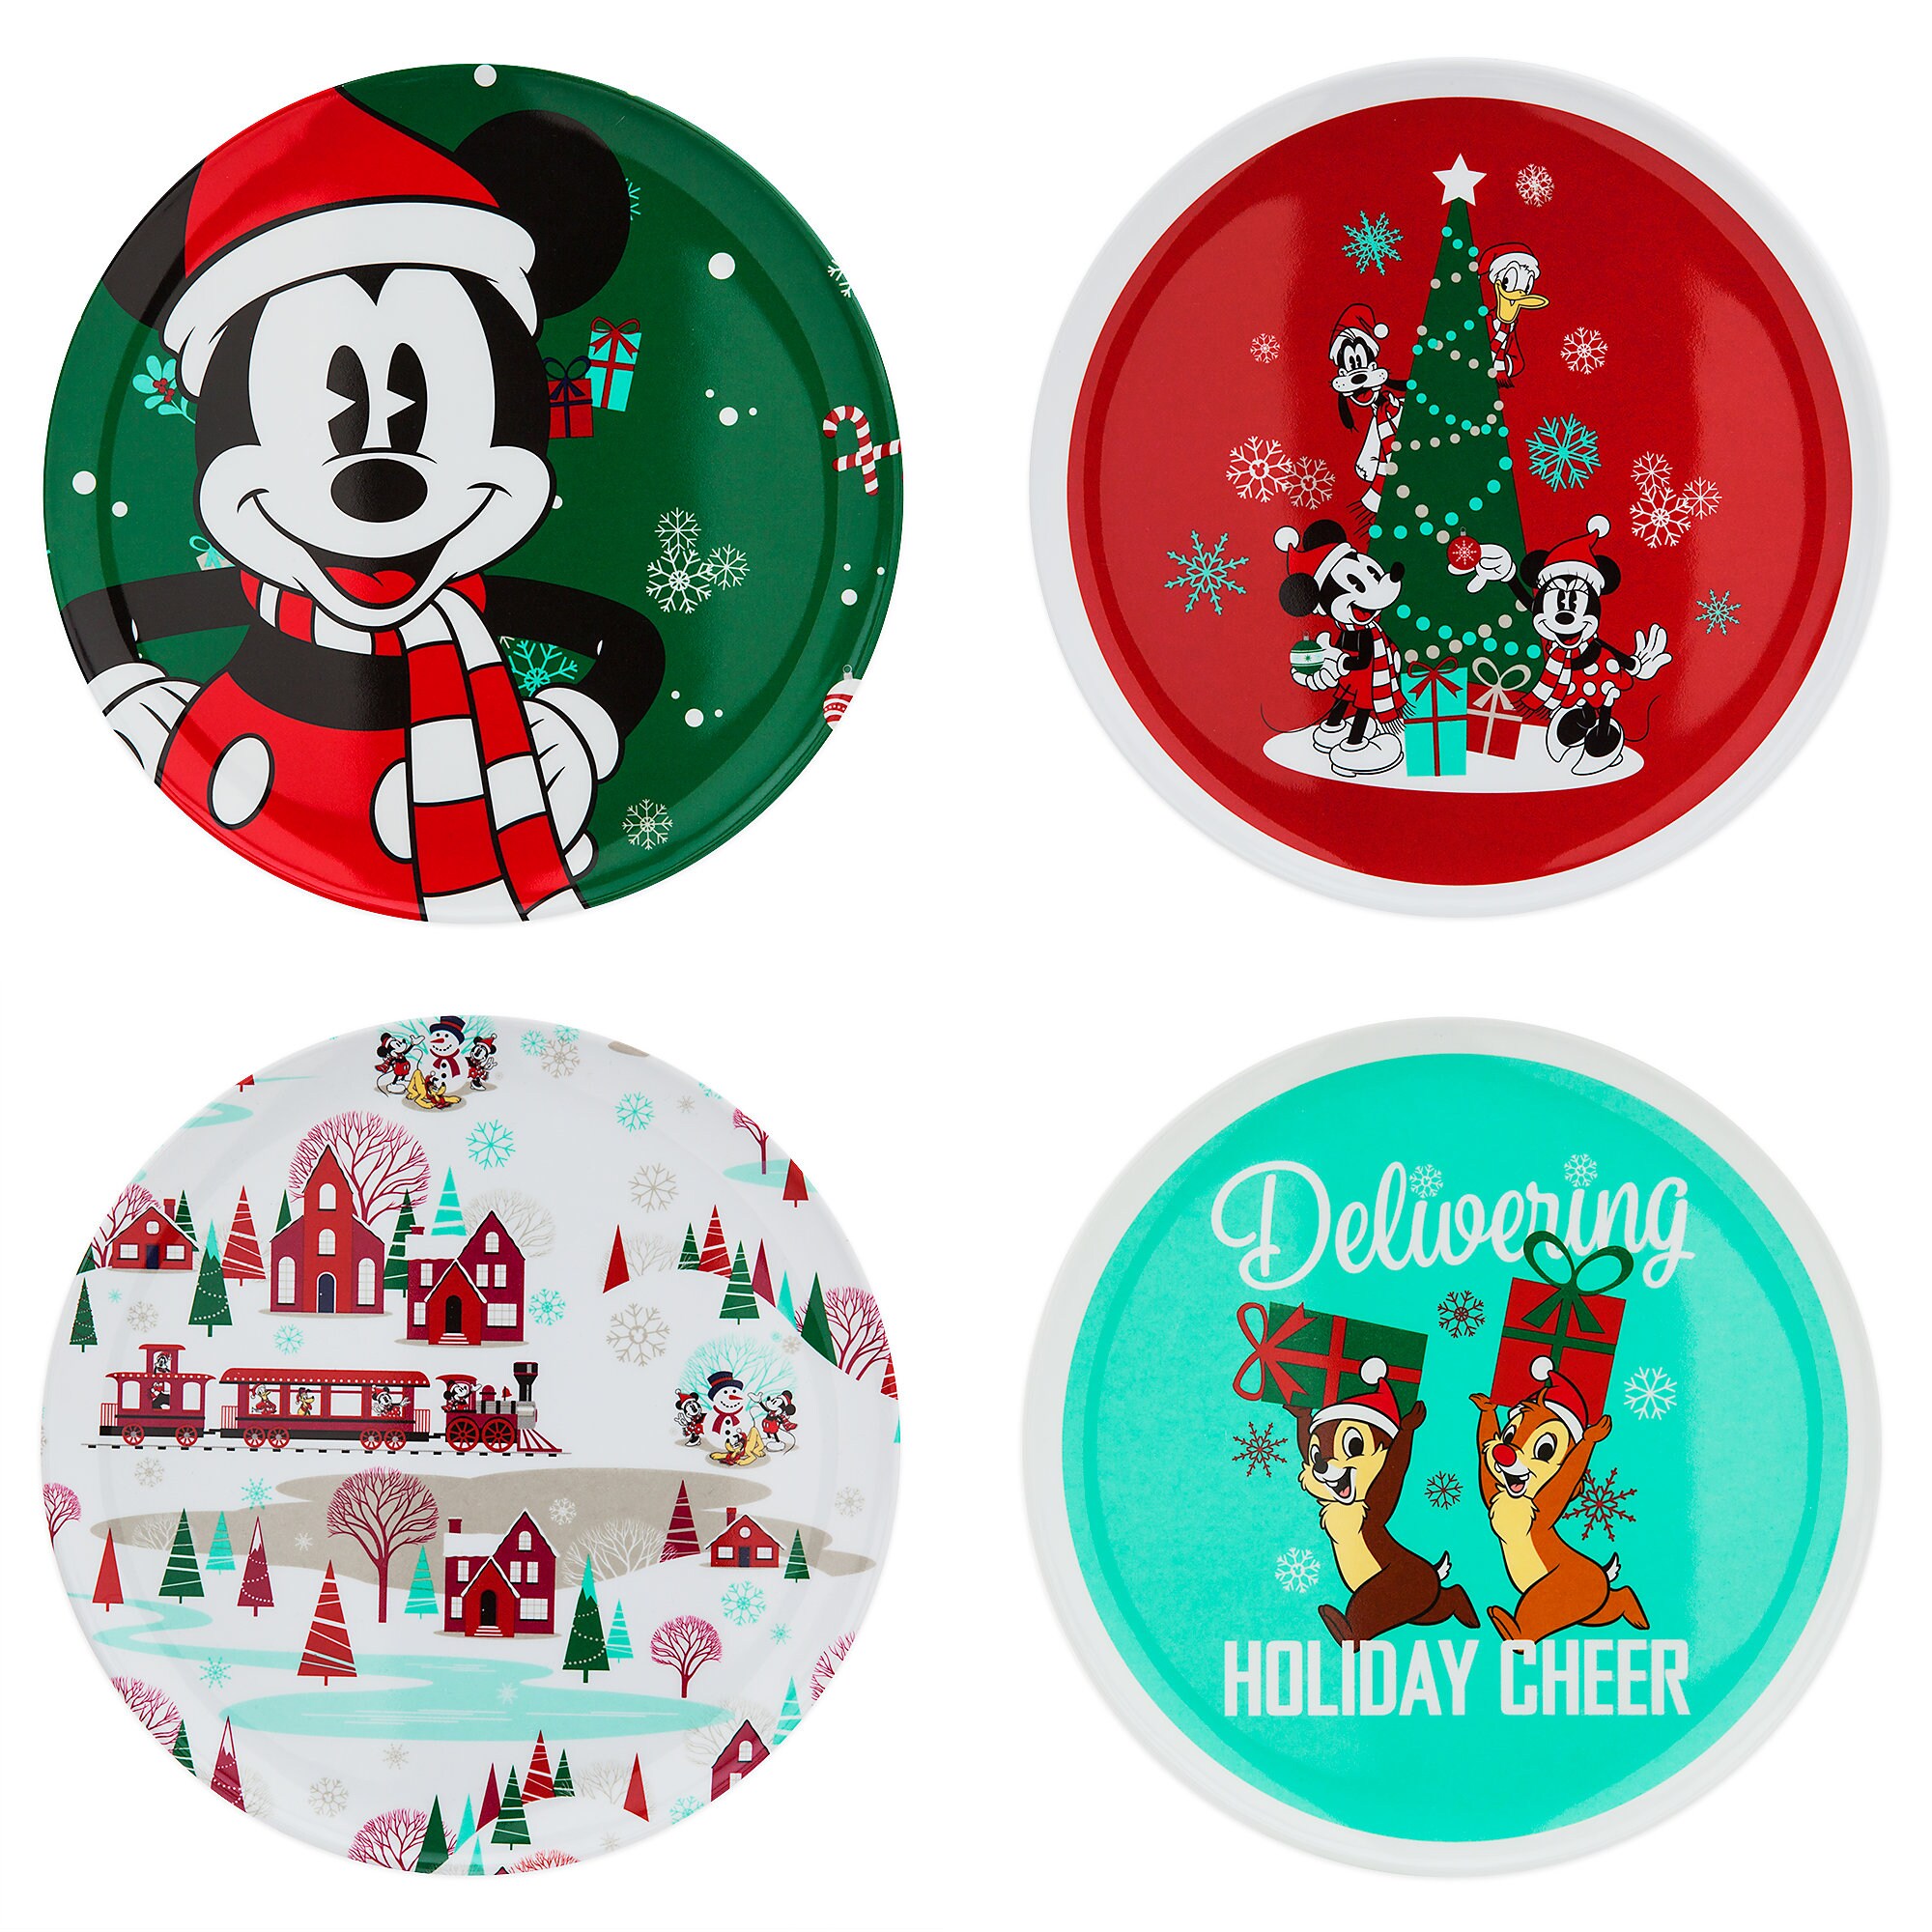 Mickey Mouse and Friends Holiday Plate Set